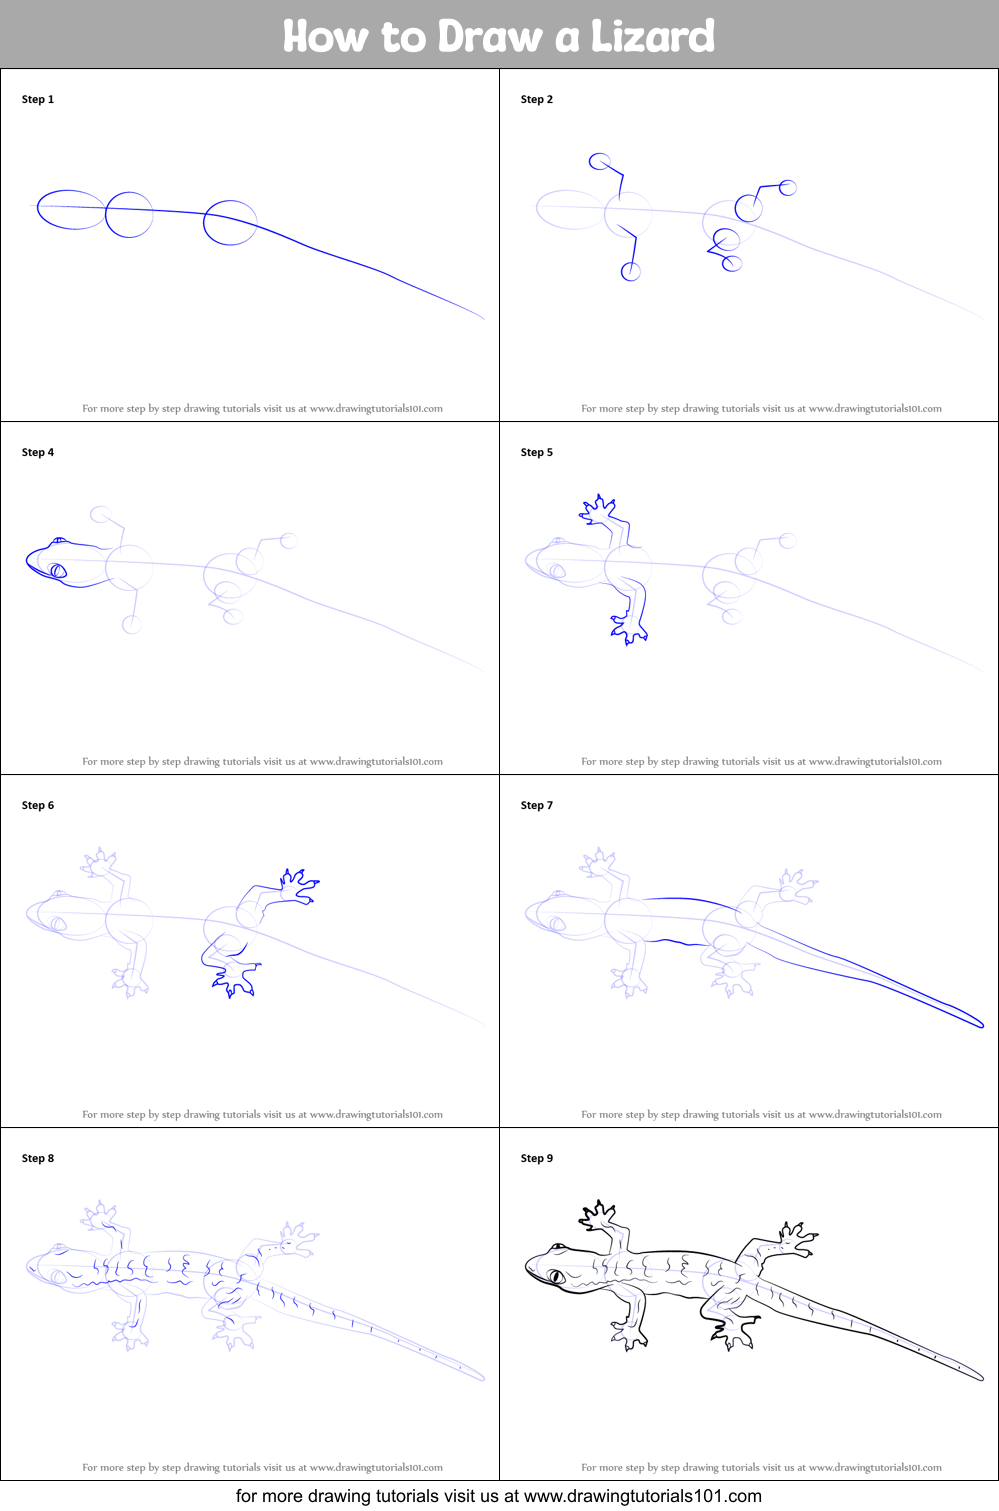 How to Draw a Lizard printable step by step drawing sheet